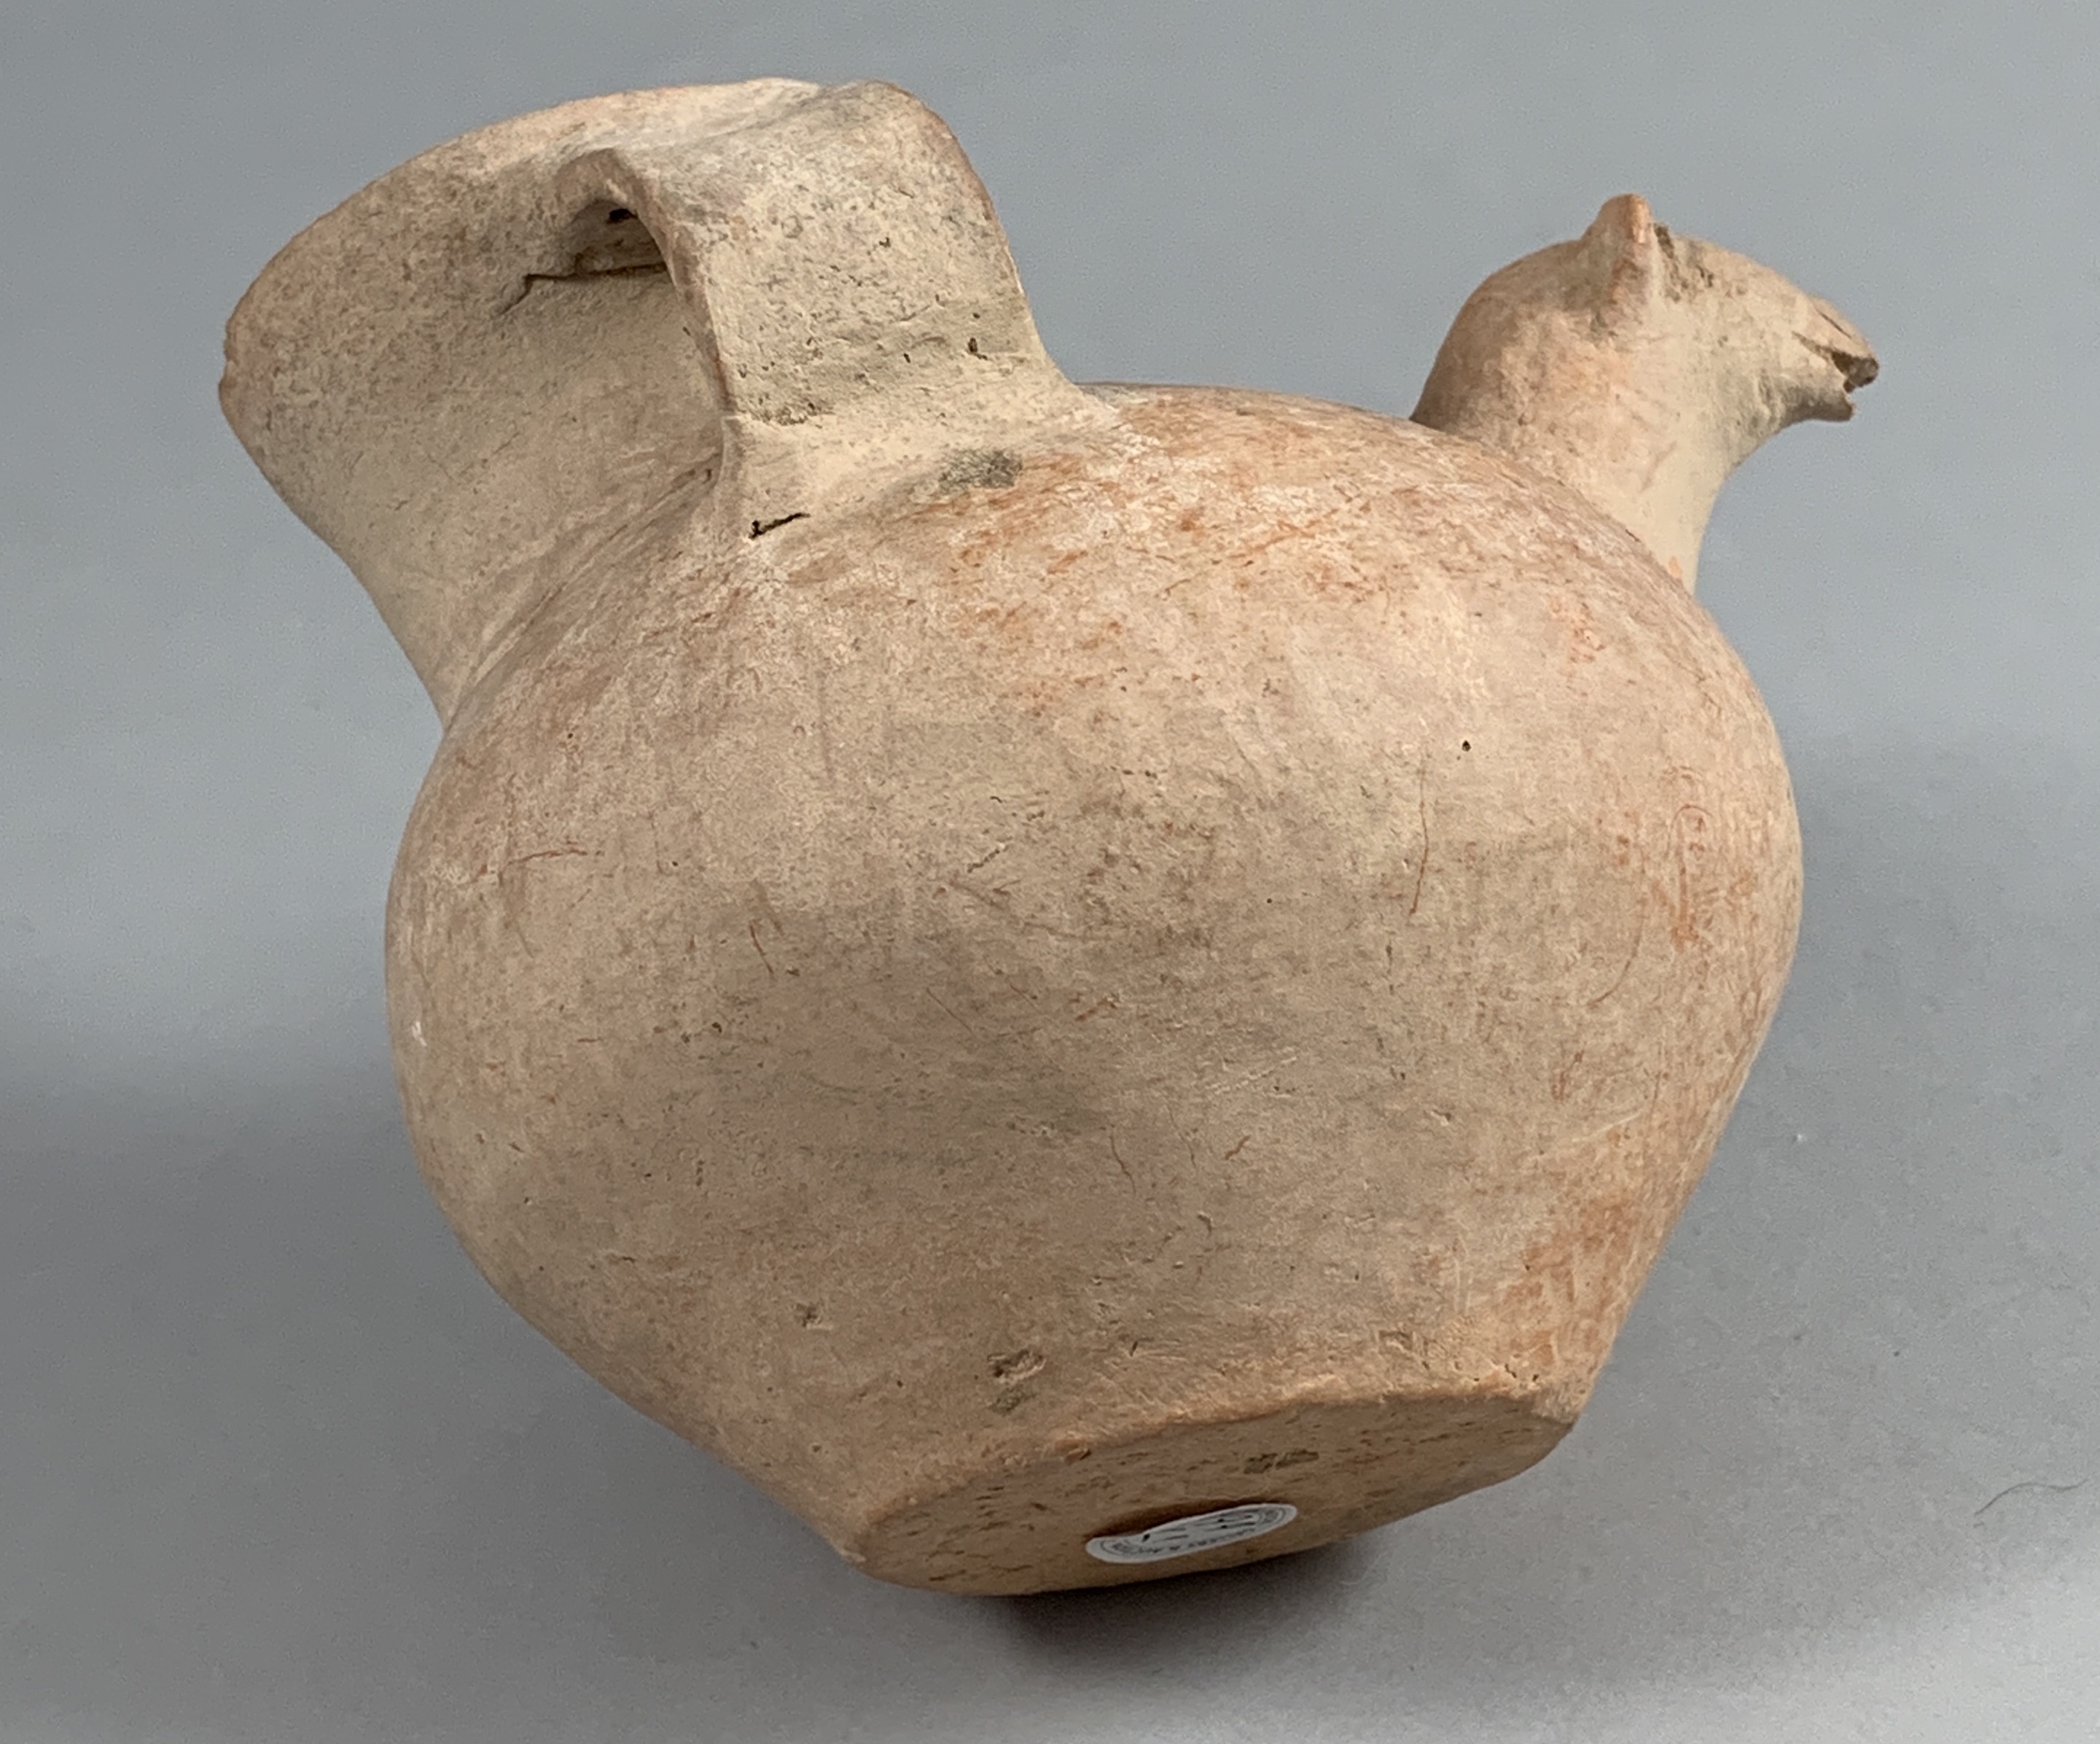 A Red Pottery Vase With Ram’s Head Handle, Gansu Province, Qijia Culture (2050-1700 Bc) - Image 11 of 15